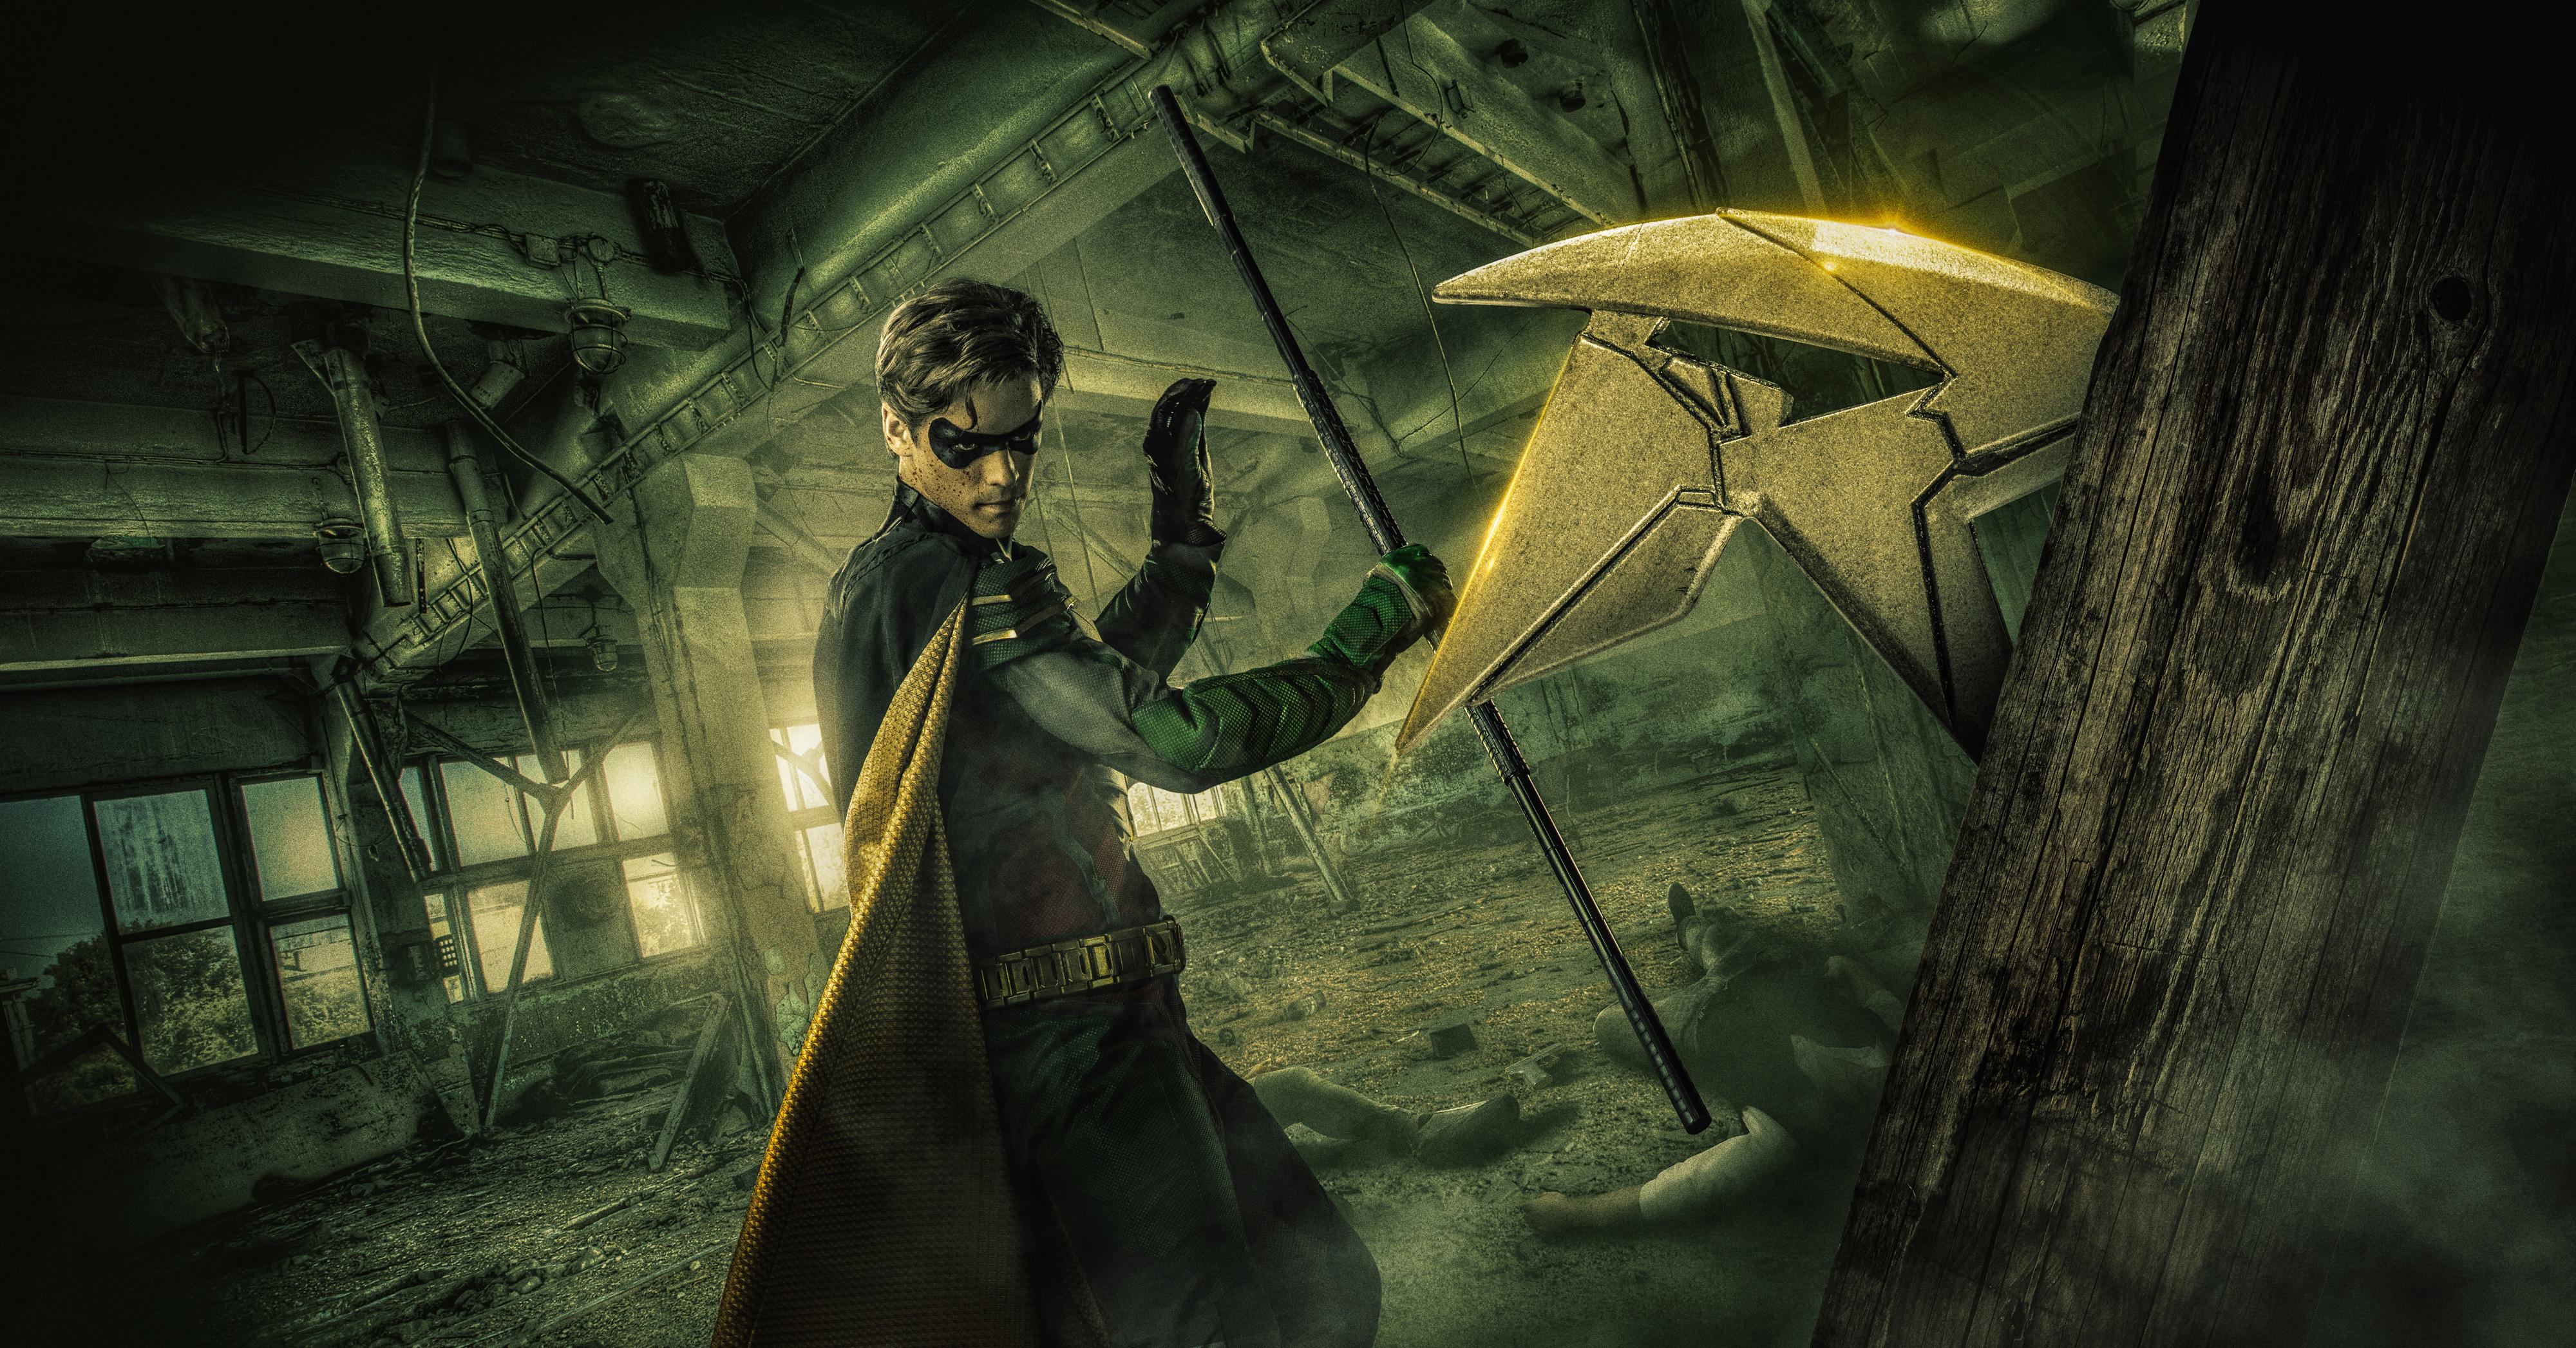 4000 x 2093 · jpeg - Robin In Titans 4k 2018, HD Tv Shows, 4k Wallpapers, Images ...